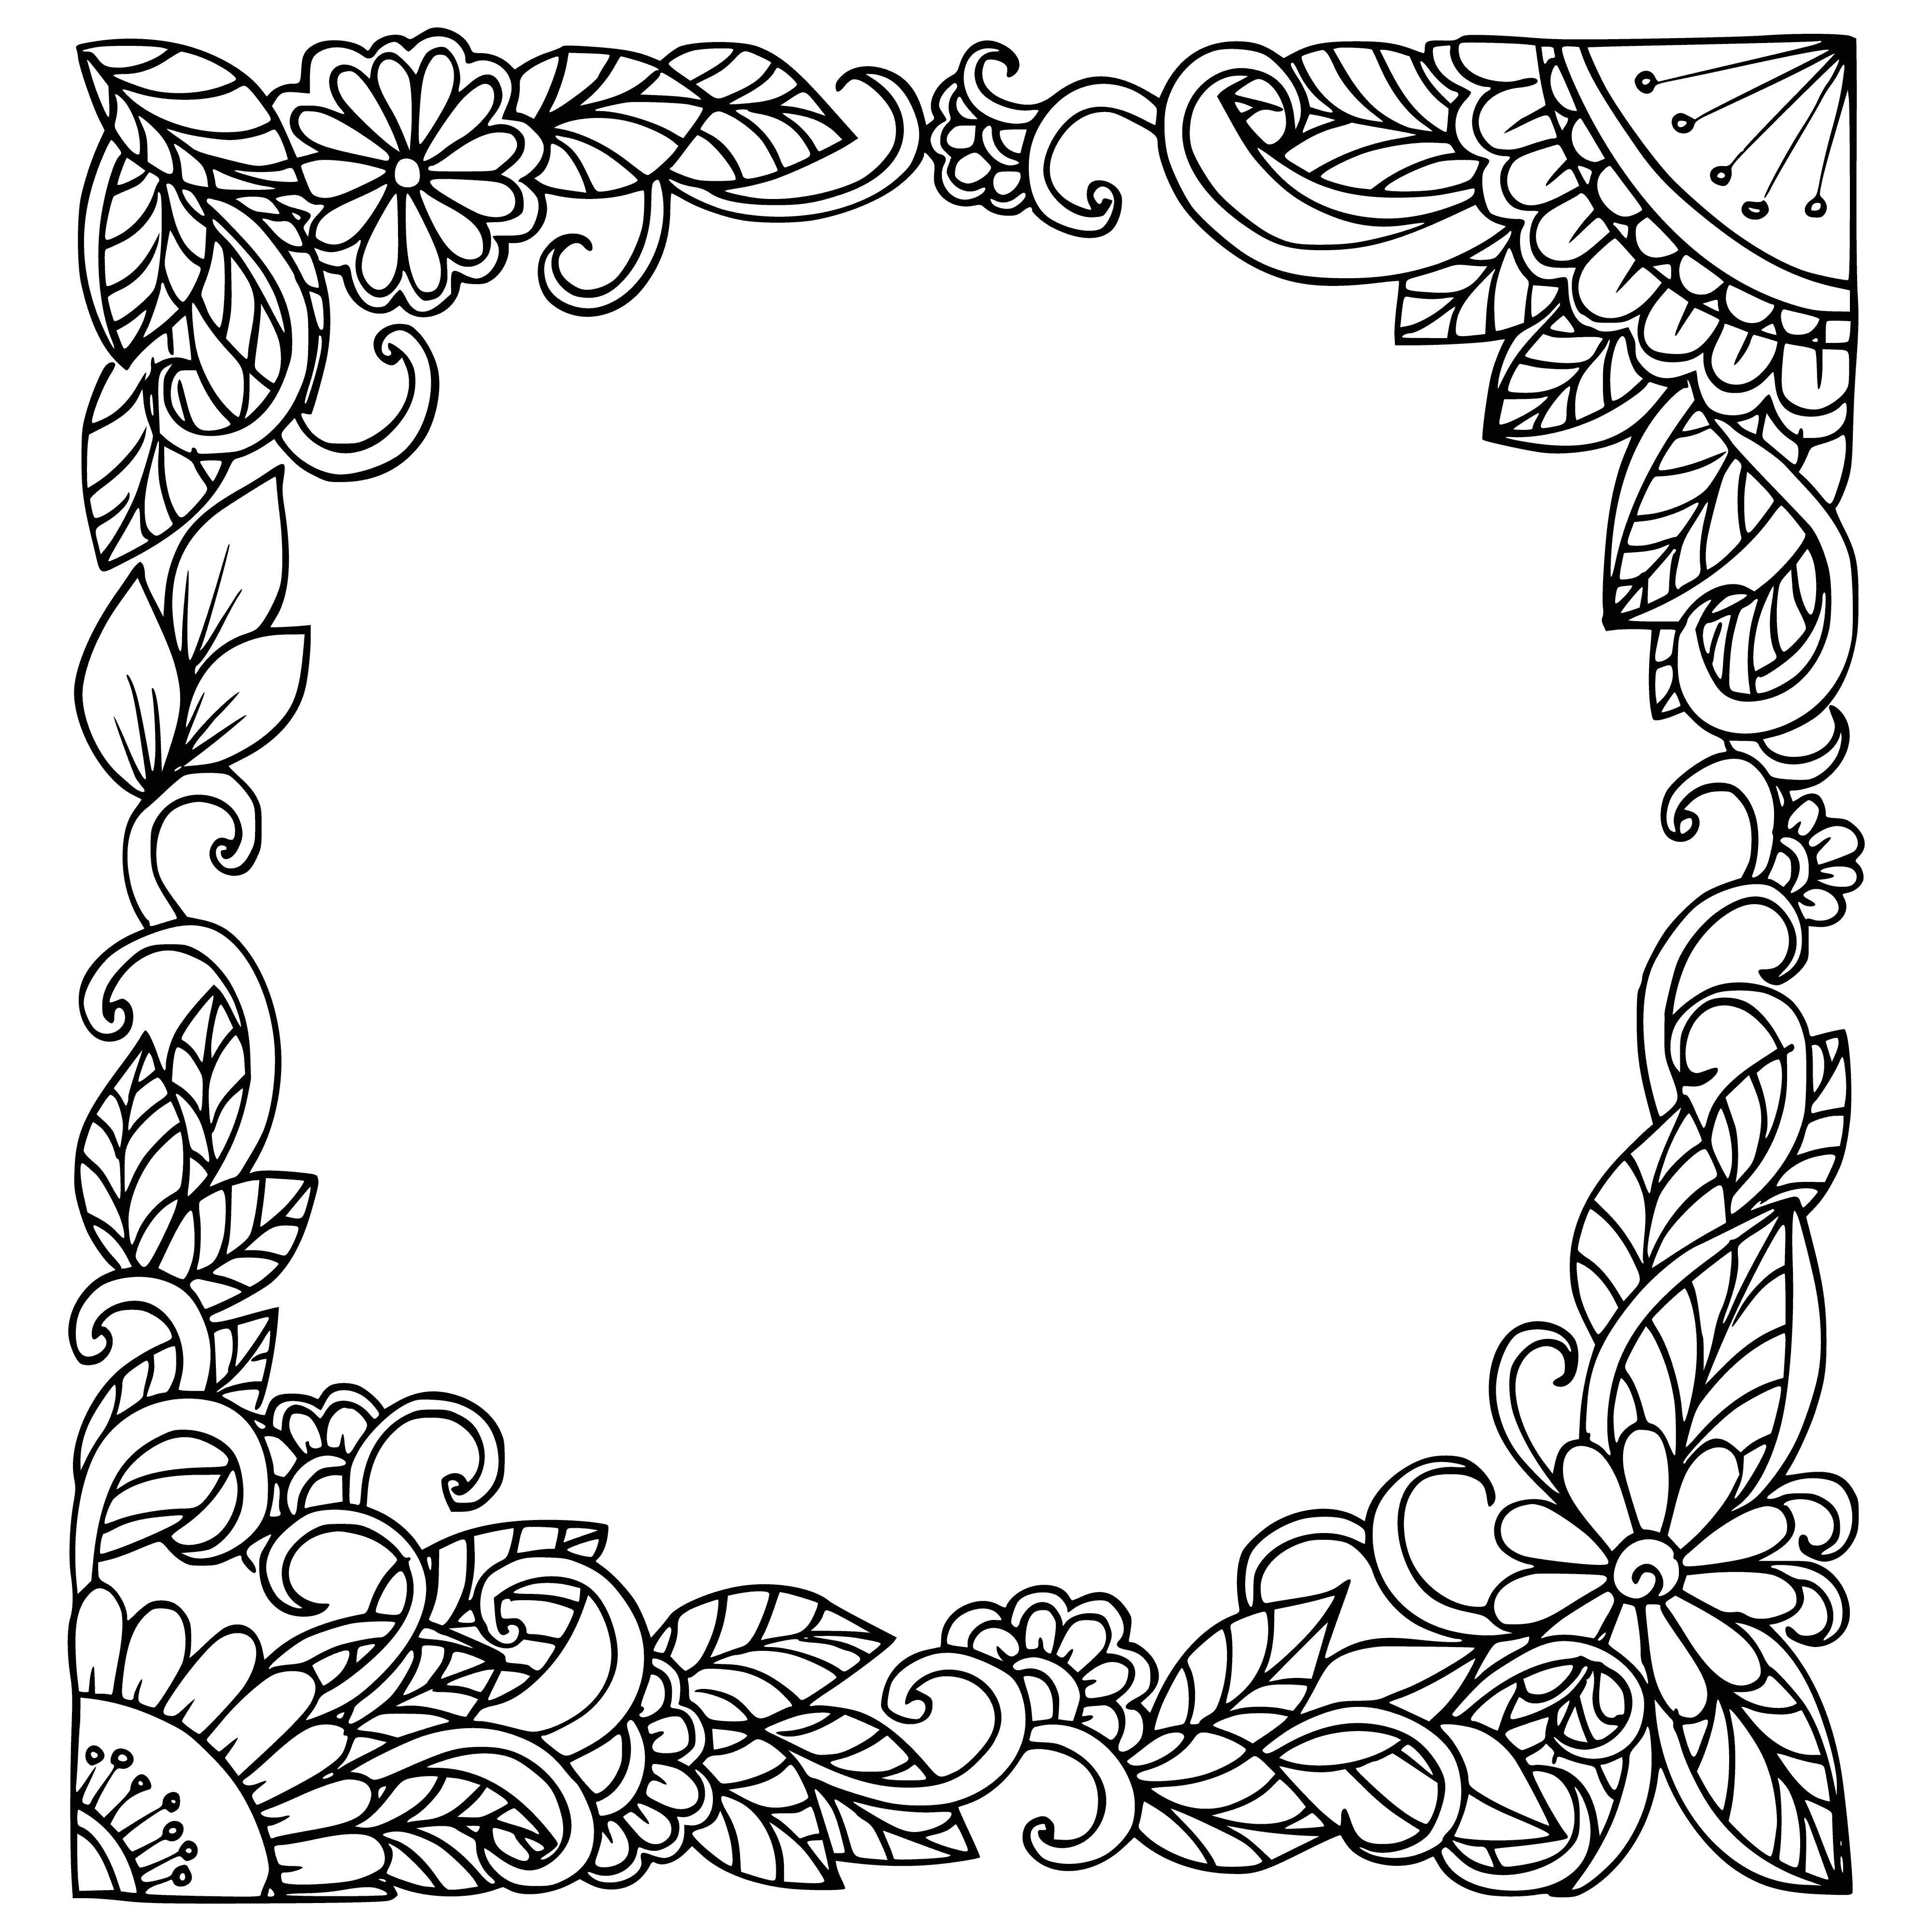 coloring page: A colorful frame of flowers, with a coloring page or message in the center, makes a fun and creative way to decorate a page. #DIY